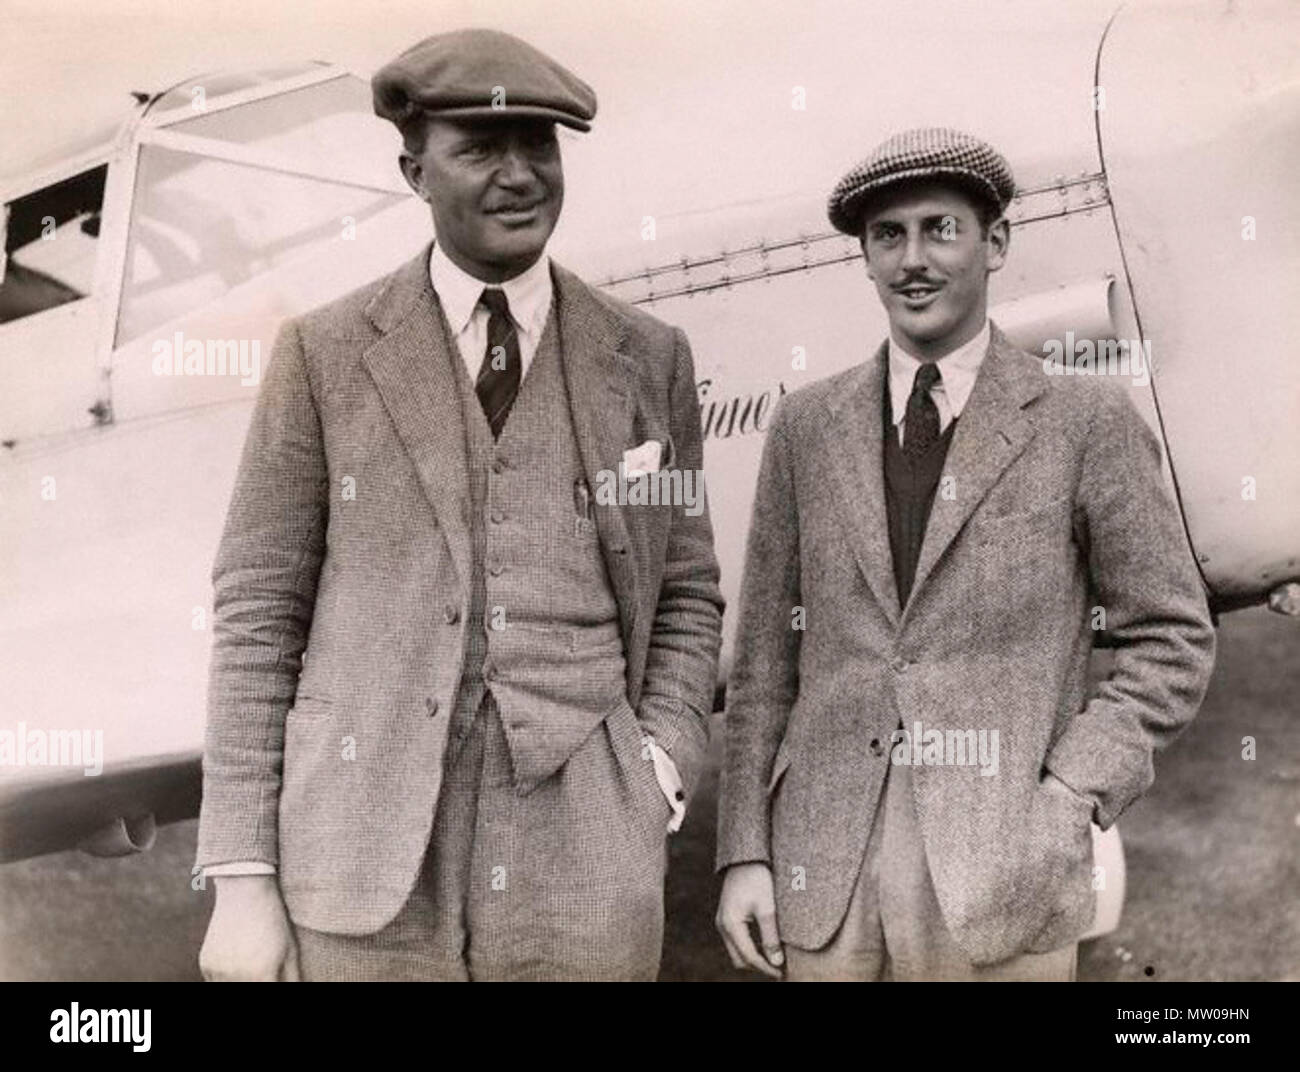 . English: C.W.A. Scott and Giles Guthrie, standing in front of the Percival Vega Gull G-AEKE in which they won the Schlesinger Air Race. September 1936. punlished by Planet News in 1936 unknown author 107 C.W.A. Scott and Guthrie vega gull Stock Photo